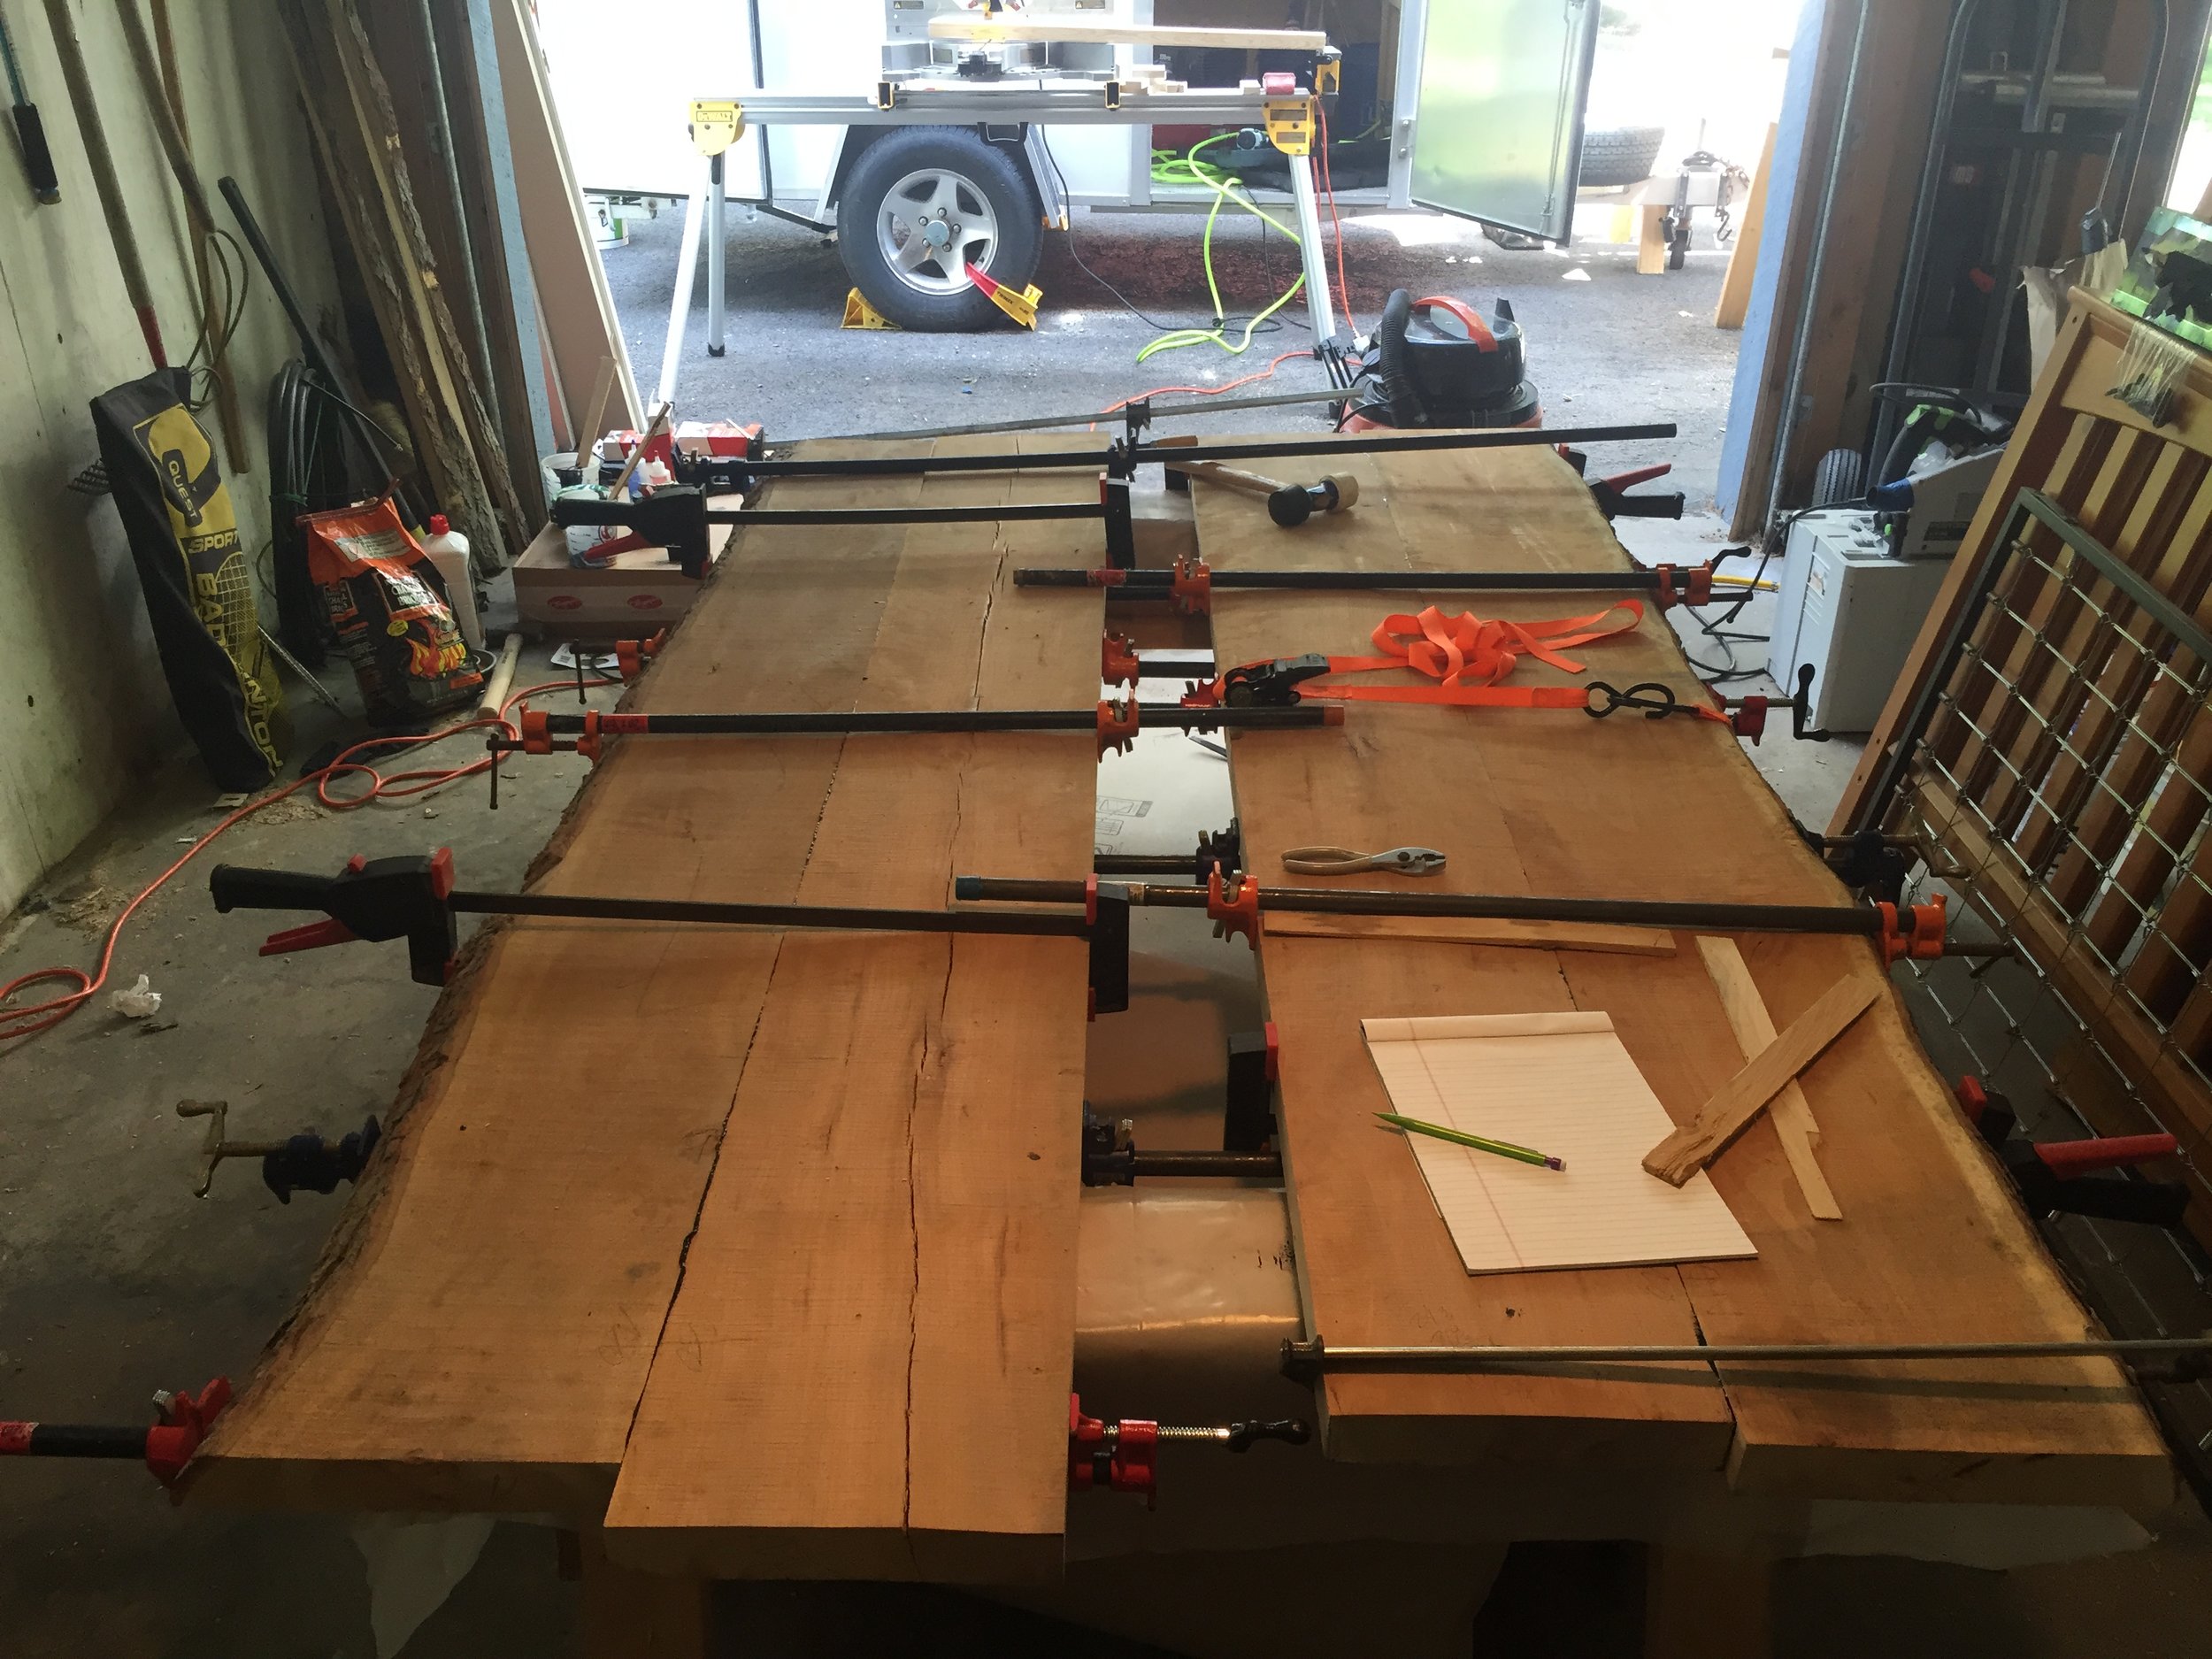  Once selected, the team shaped and glued up the slabs into the bar countertop. 